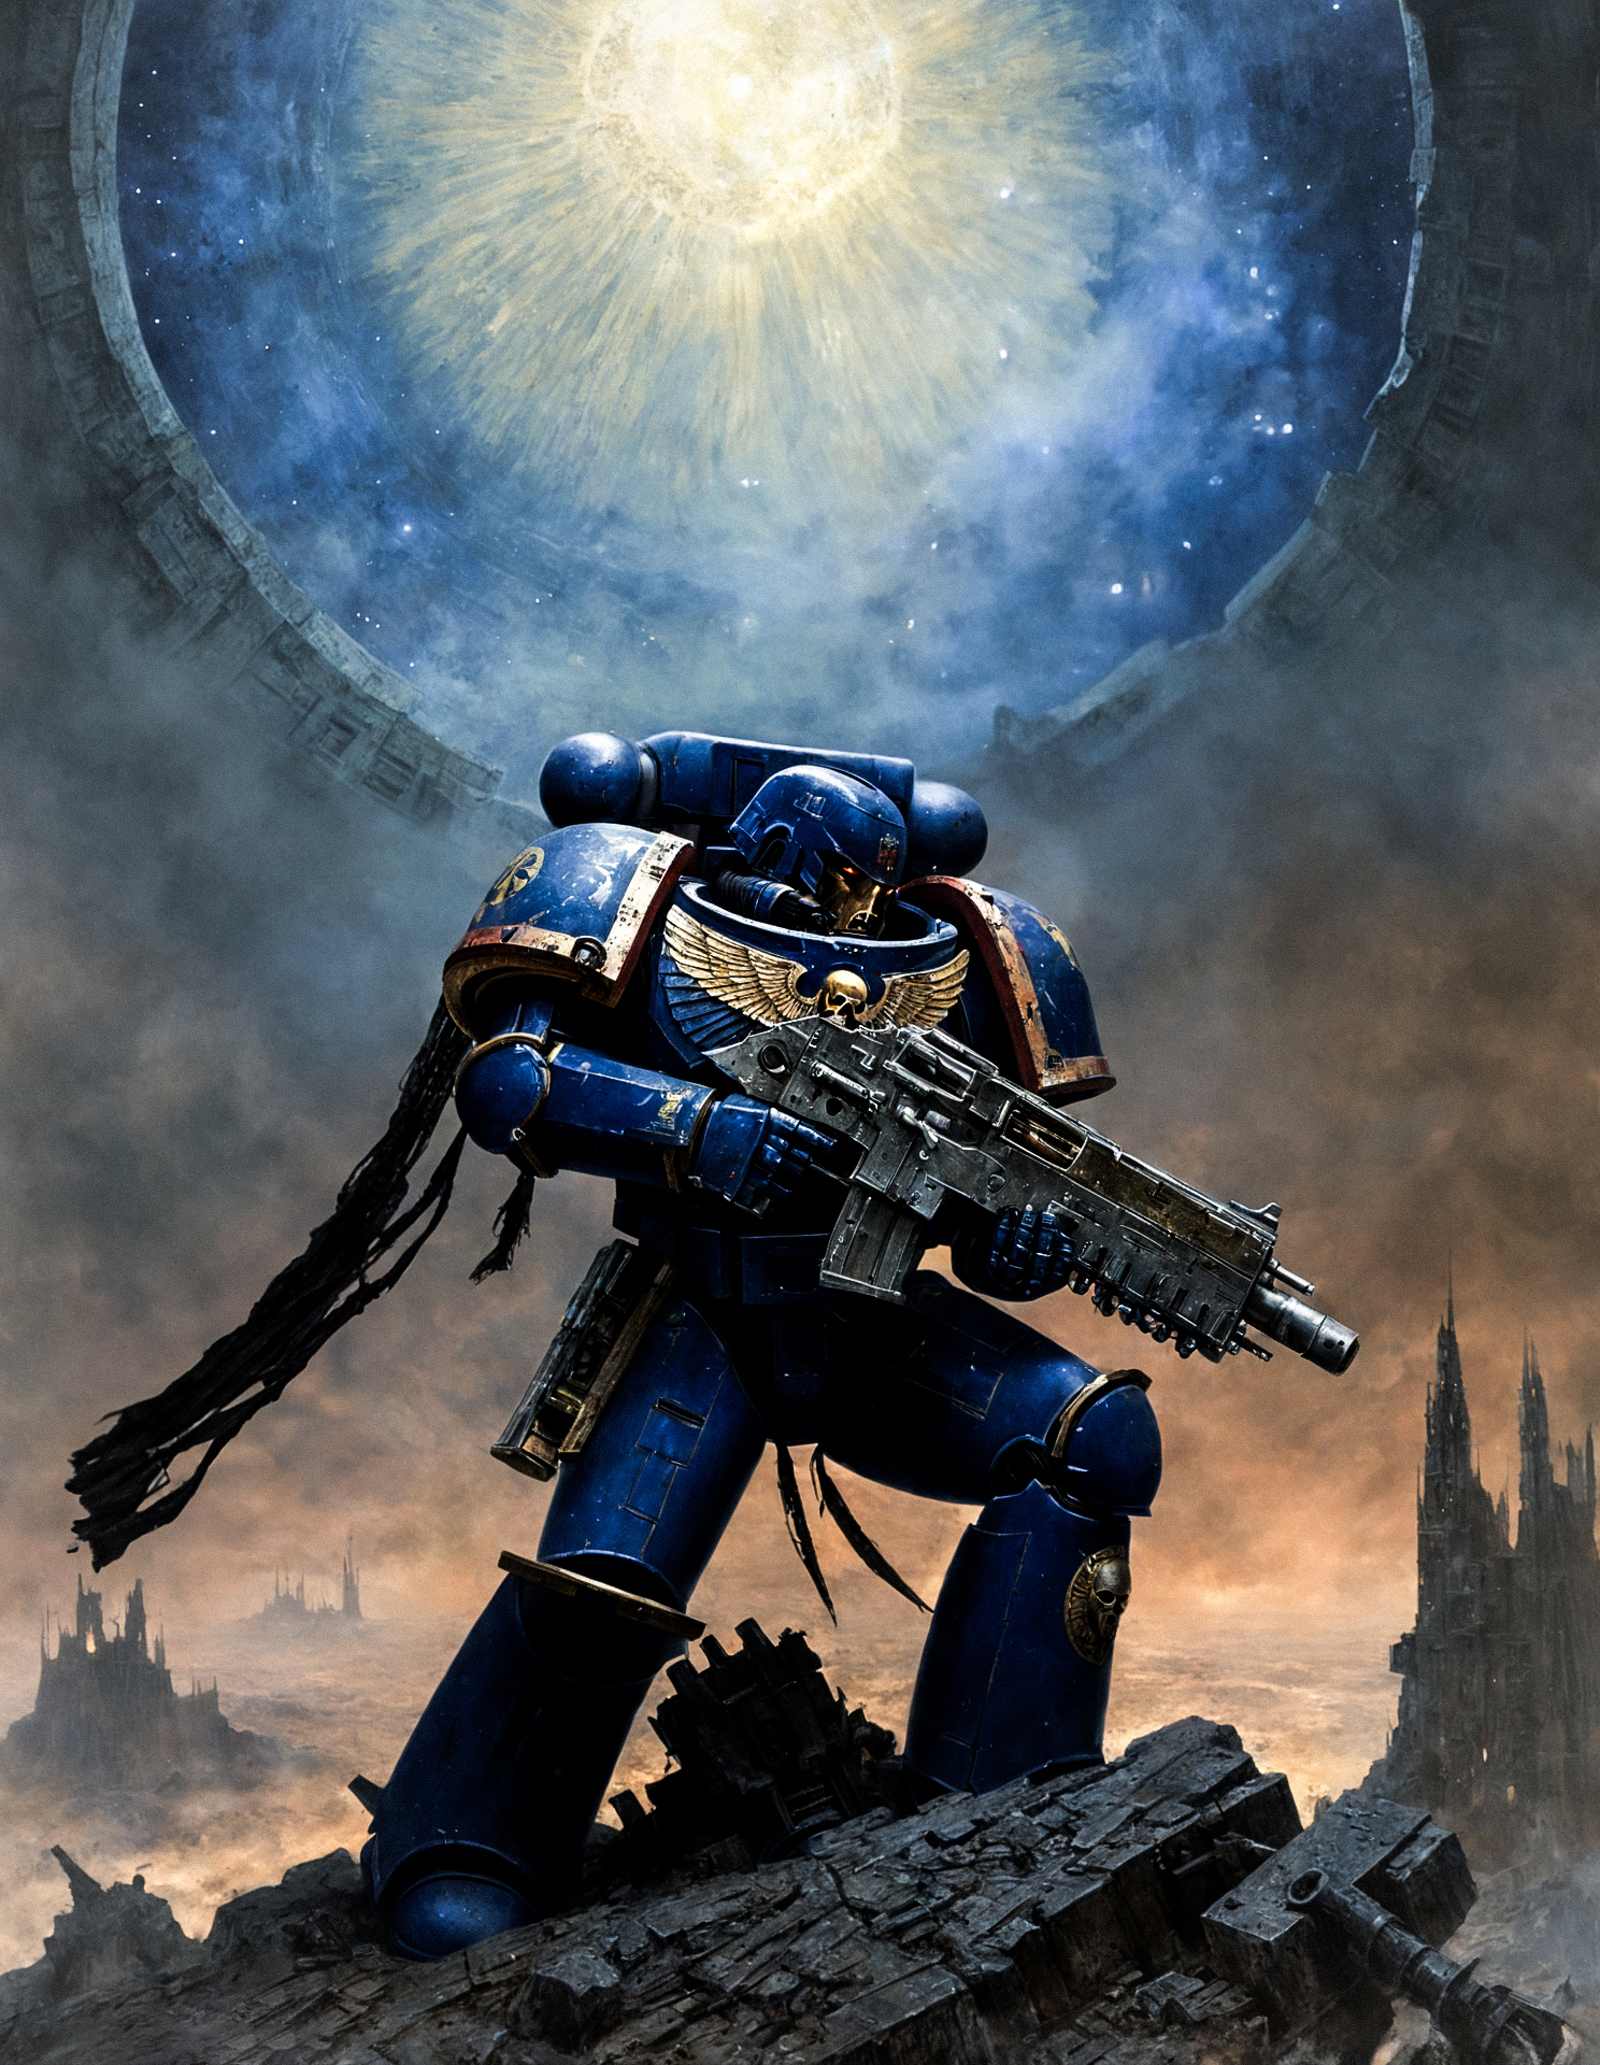 A futuristic sci-fi painting of a soldier holding a gun in front of a massive doorway.